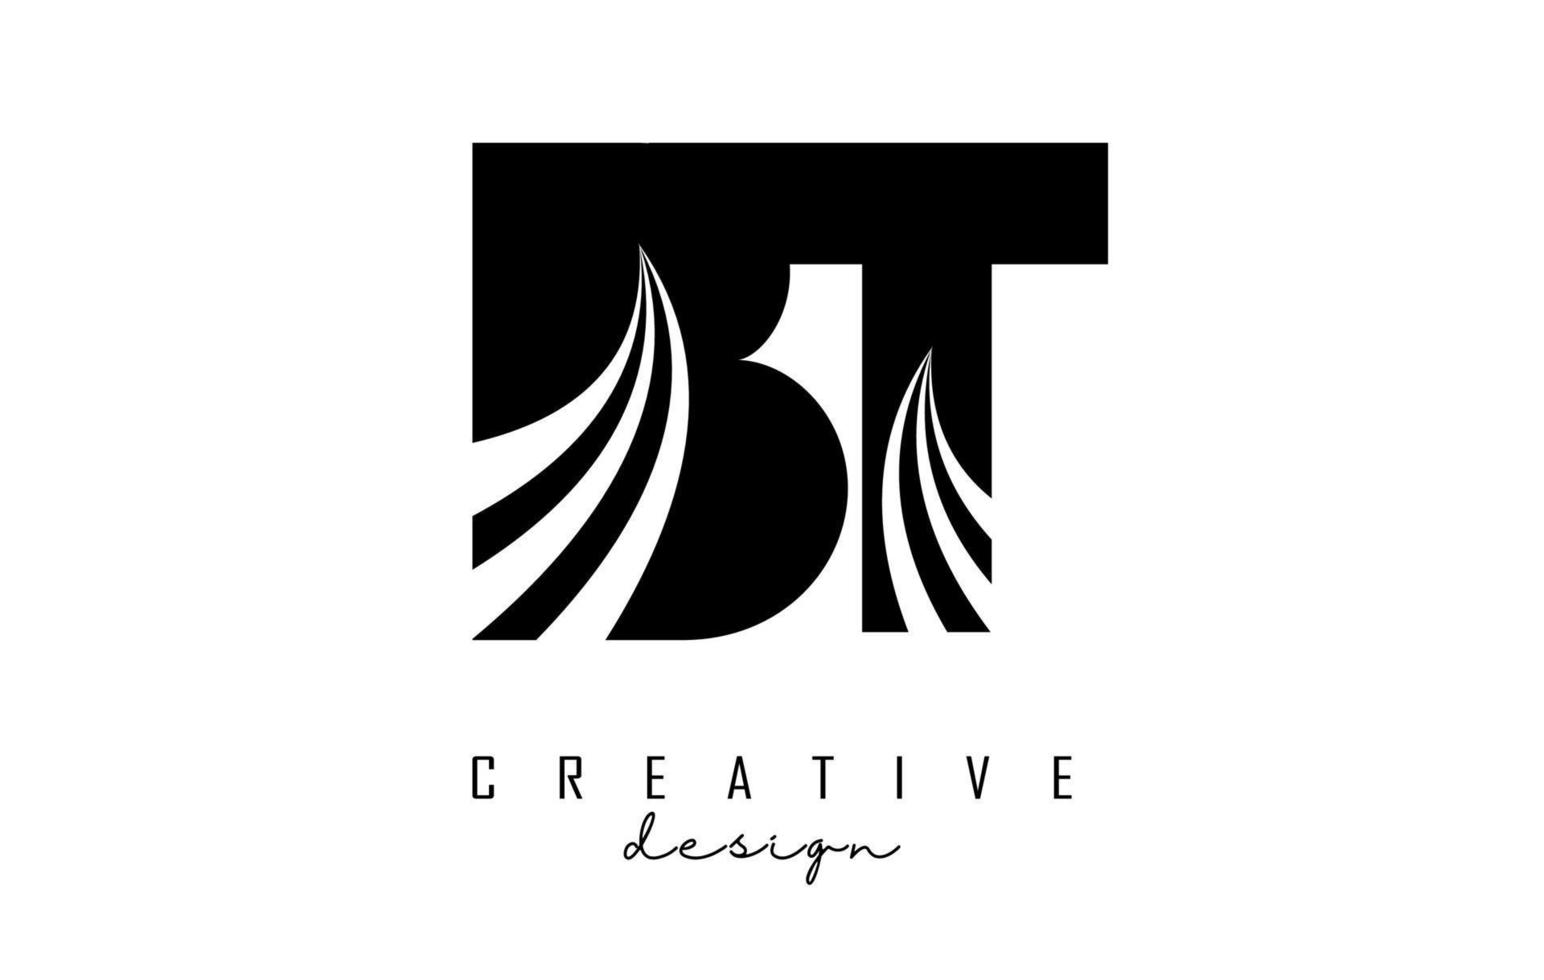 Creative black letters BT b t logo with leading lines and road concept design. Letters with geometric design. vector